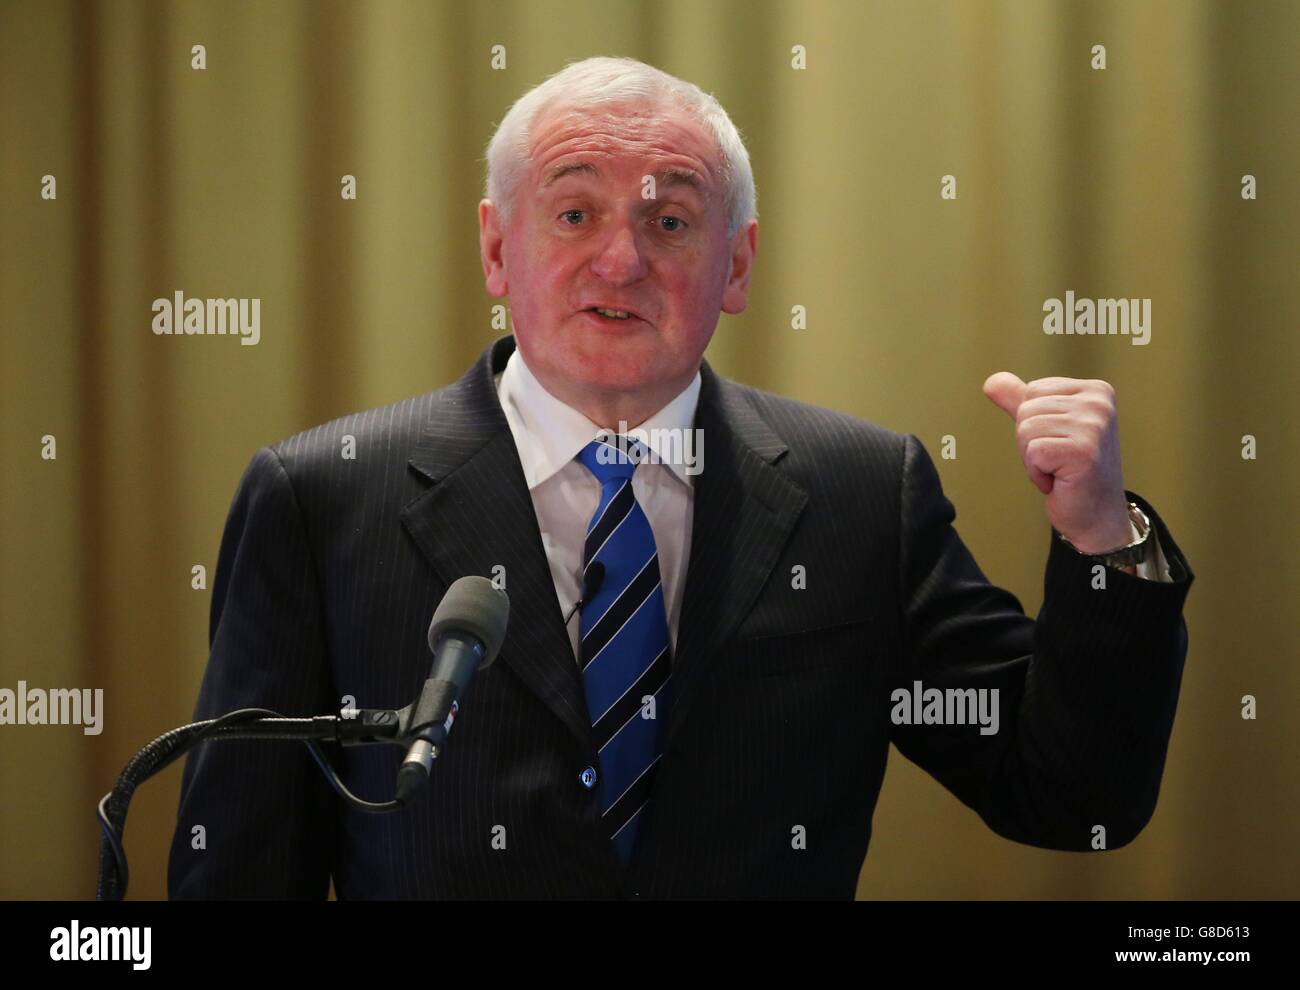 Former Taoiseach Bertie Ahern speaking during the Newry Mourne and Down District Council hosted Brexit - The Big Debate on the implications of a UK exit from the EU at the Canal Court Hotel in Newry, Northern Ireland. Stock Photo